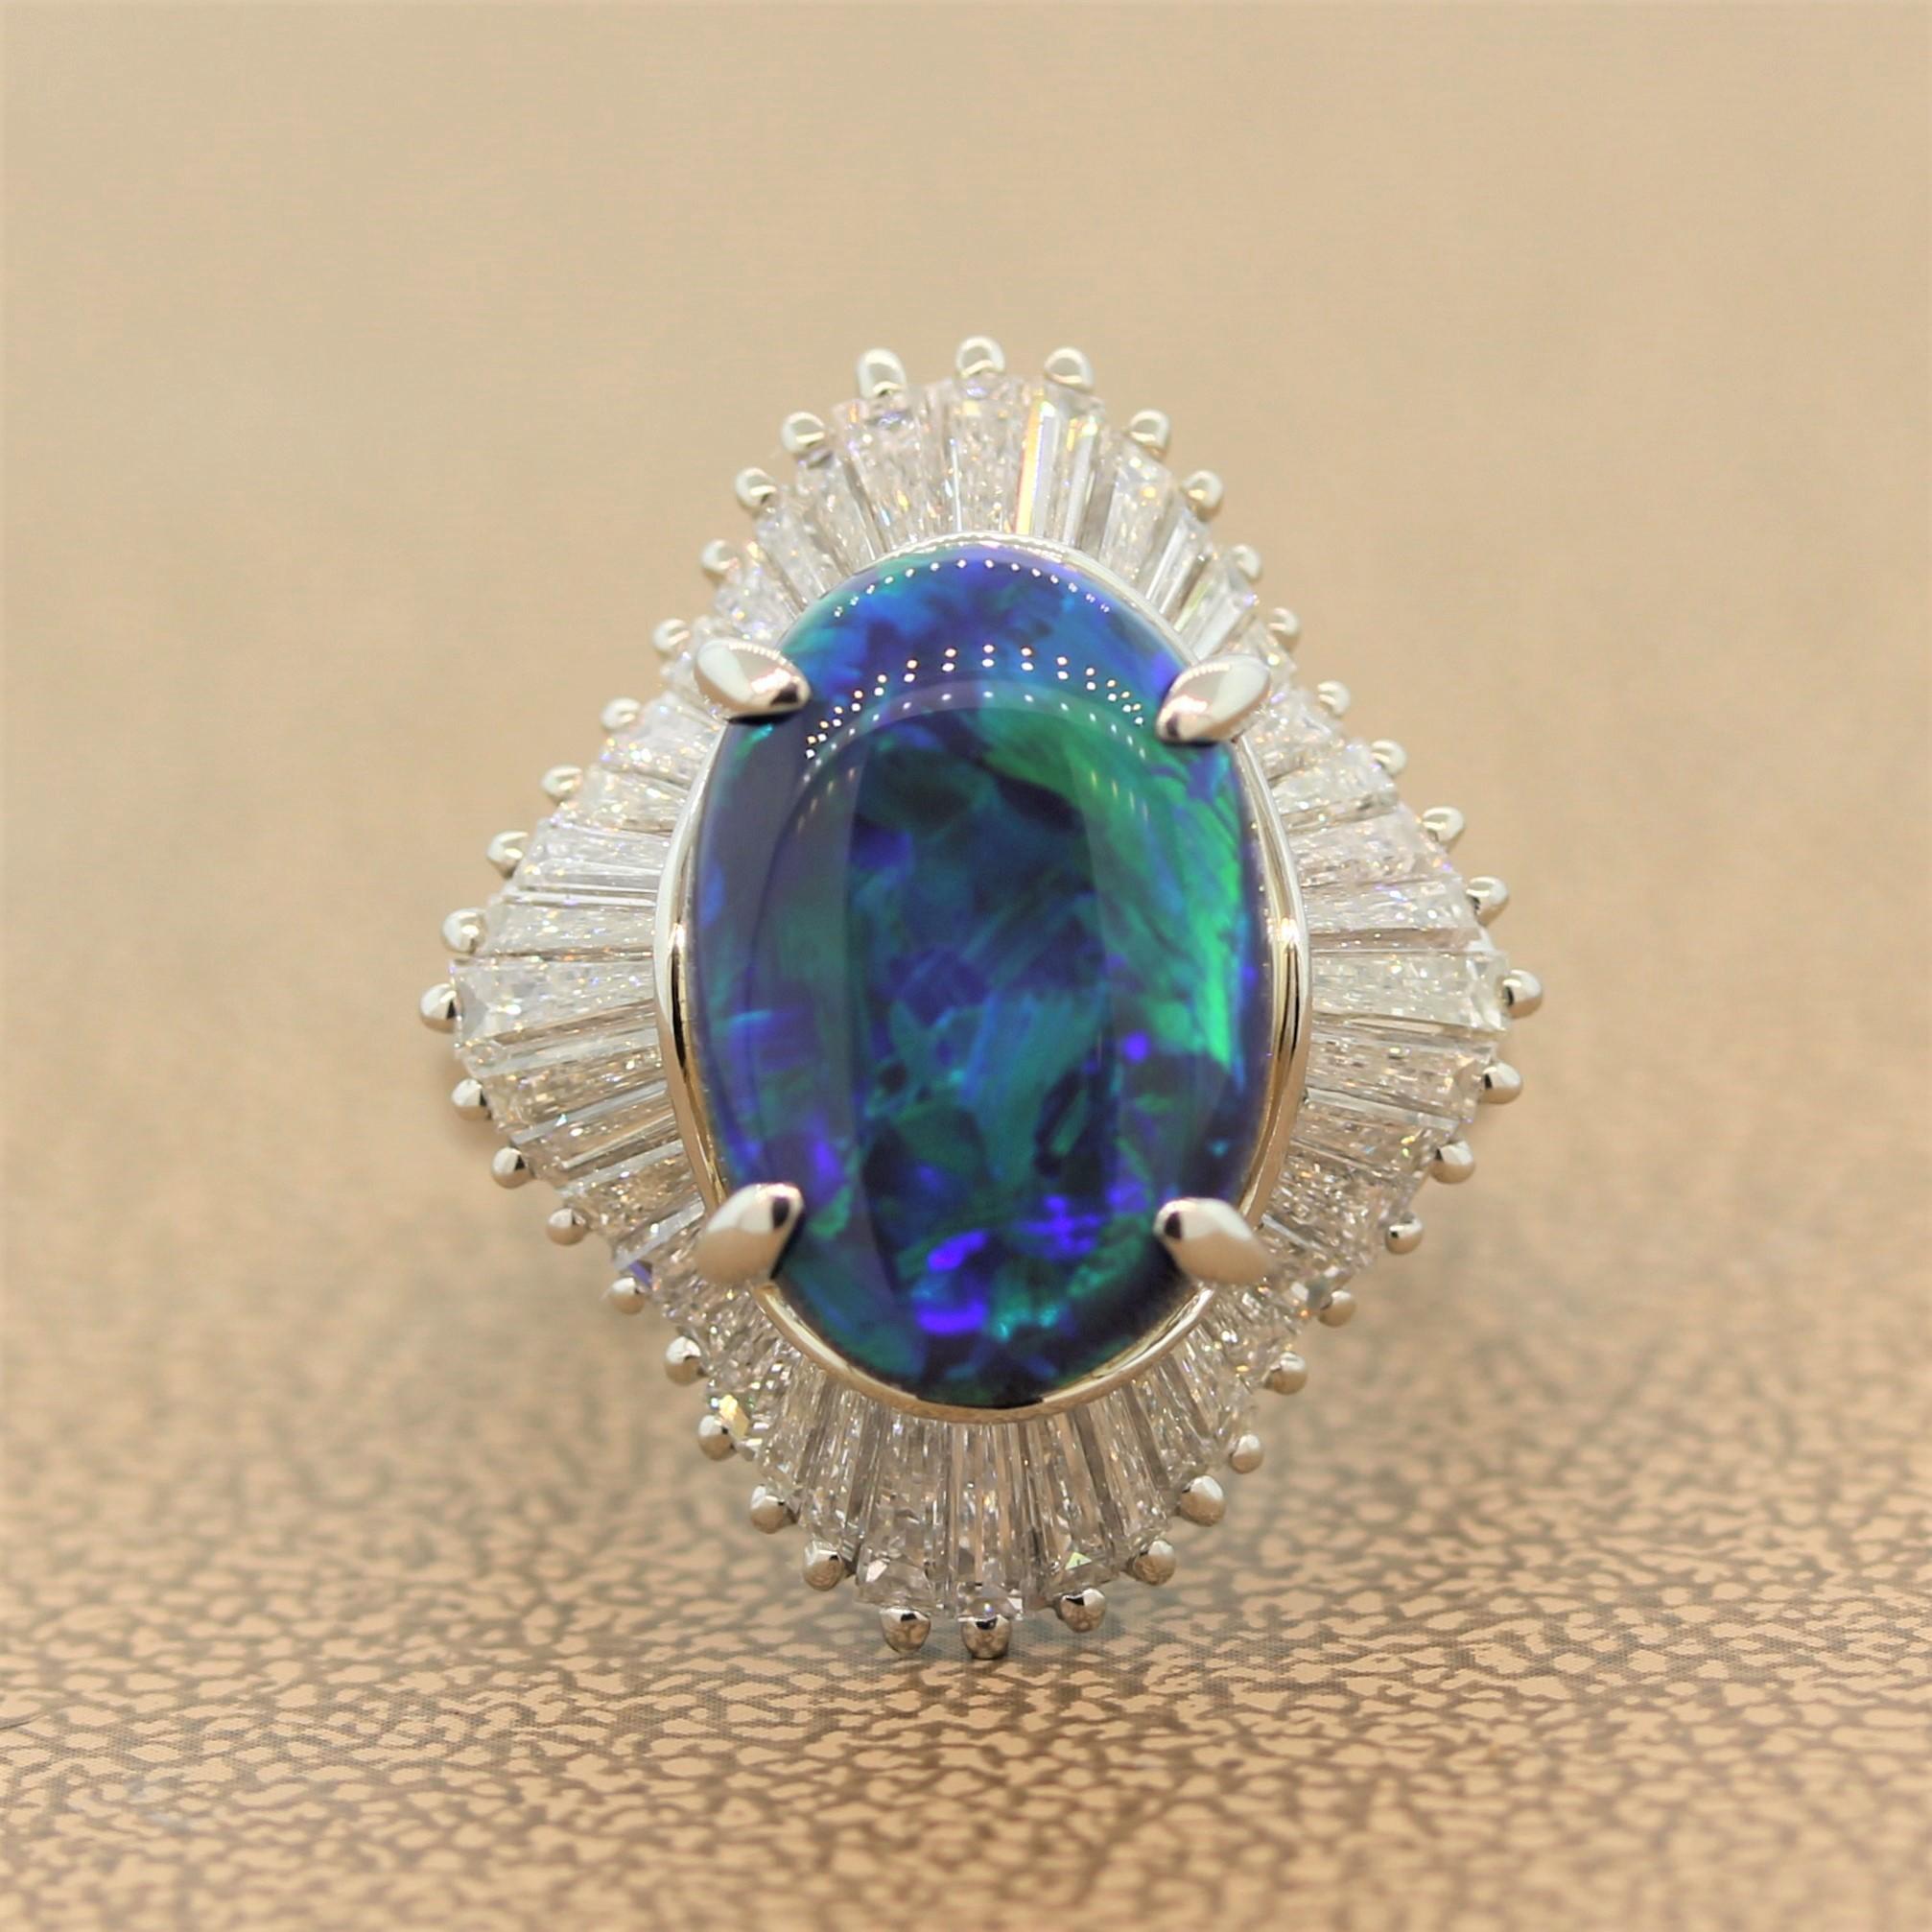 A perfect cocktail ring for day and night featuring a gem 4.83 carat black opal. The Australian opal shows bright and strong flashes or blue and green over a deep dark black body color enhancing the play of color from the opal. It is haloed by 2.25